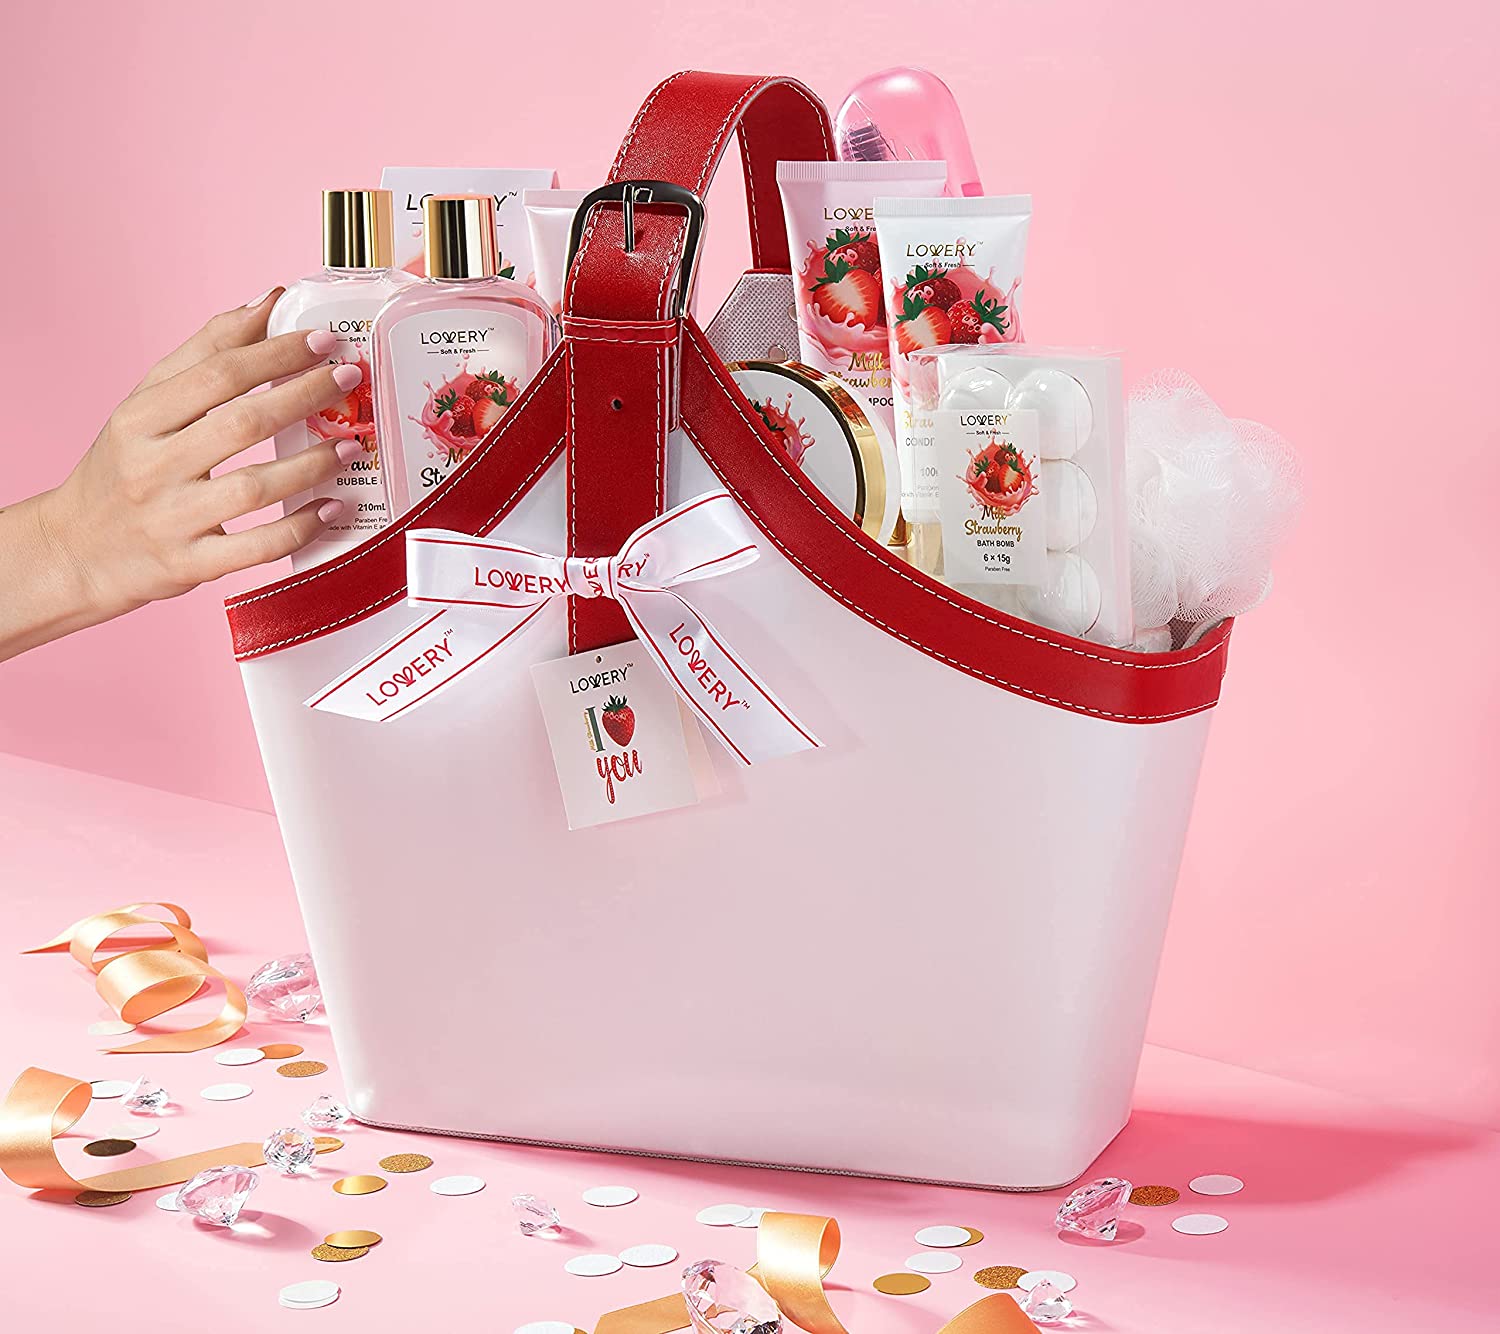 lovery Strawberry Bath Set, lovery Strawberry Milk Home Bath Gift Set, Milk Bath Set, Home Bath Gift Set, Home Bath Set, Spa Treats, Fruity Fragrance Delight, Calming Bath Essentials, Creamy Scents, Skin-Pampering Gift, Bath Kit, Body Kit 